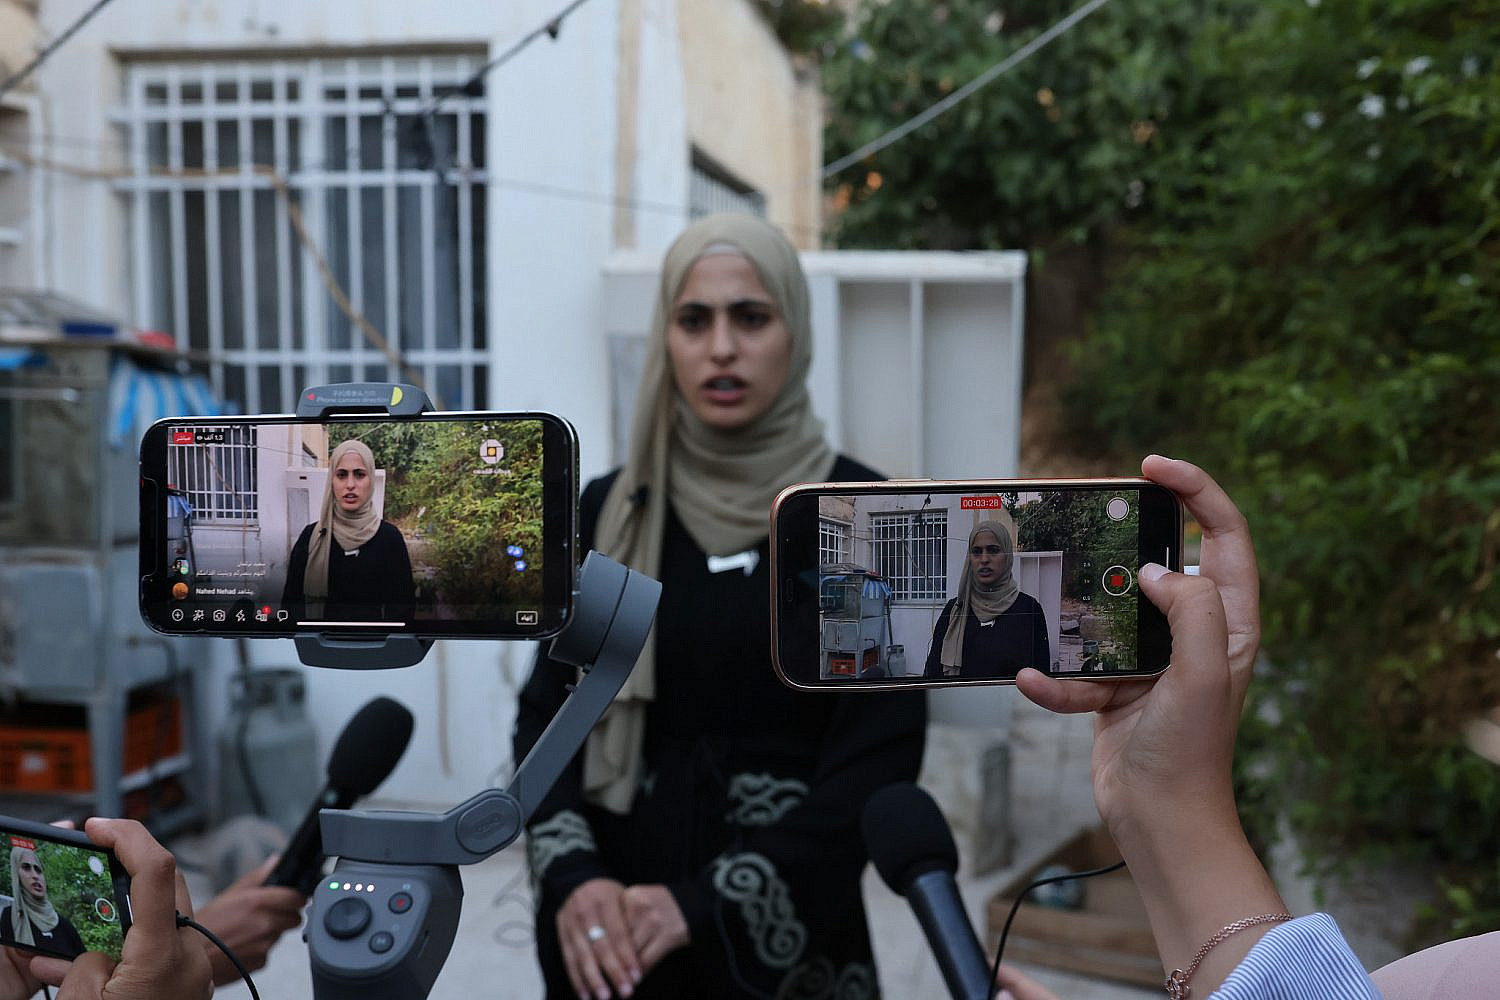 Prominent Palestinian activist Muna el-Kurd and her brother Mohammed return to their home in Sheikh Jarrah, Jerusalem, after being detained and interrogated by Israeli police, June 6, 2021. (Oren Ziv/Activestills)